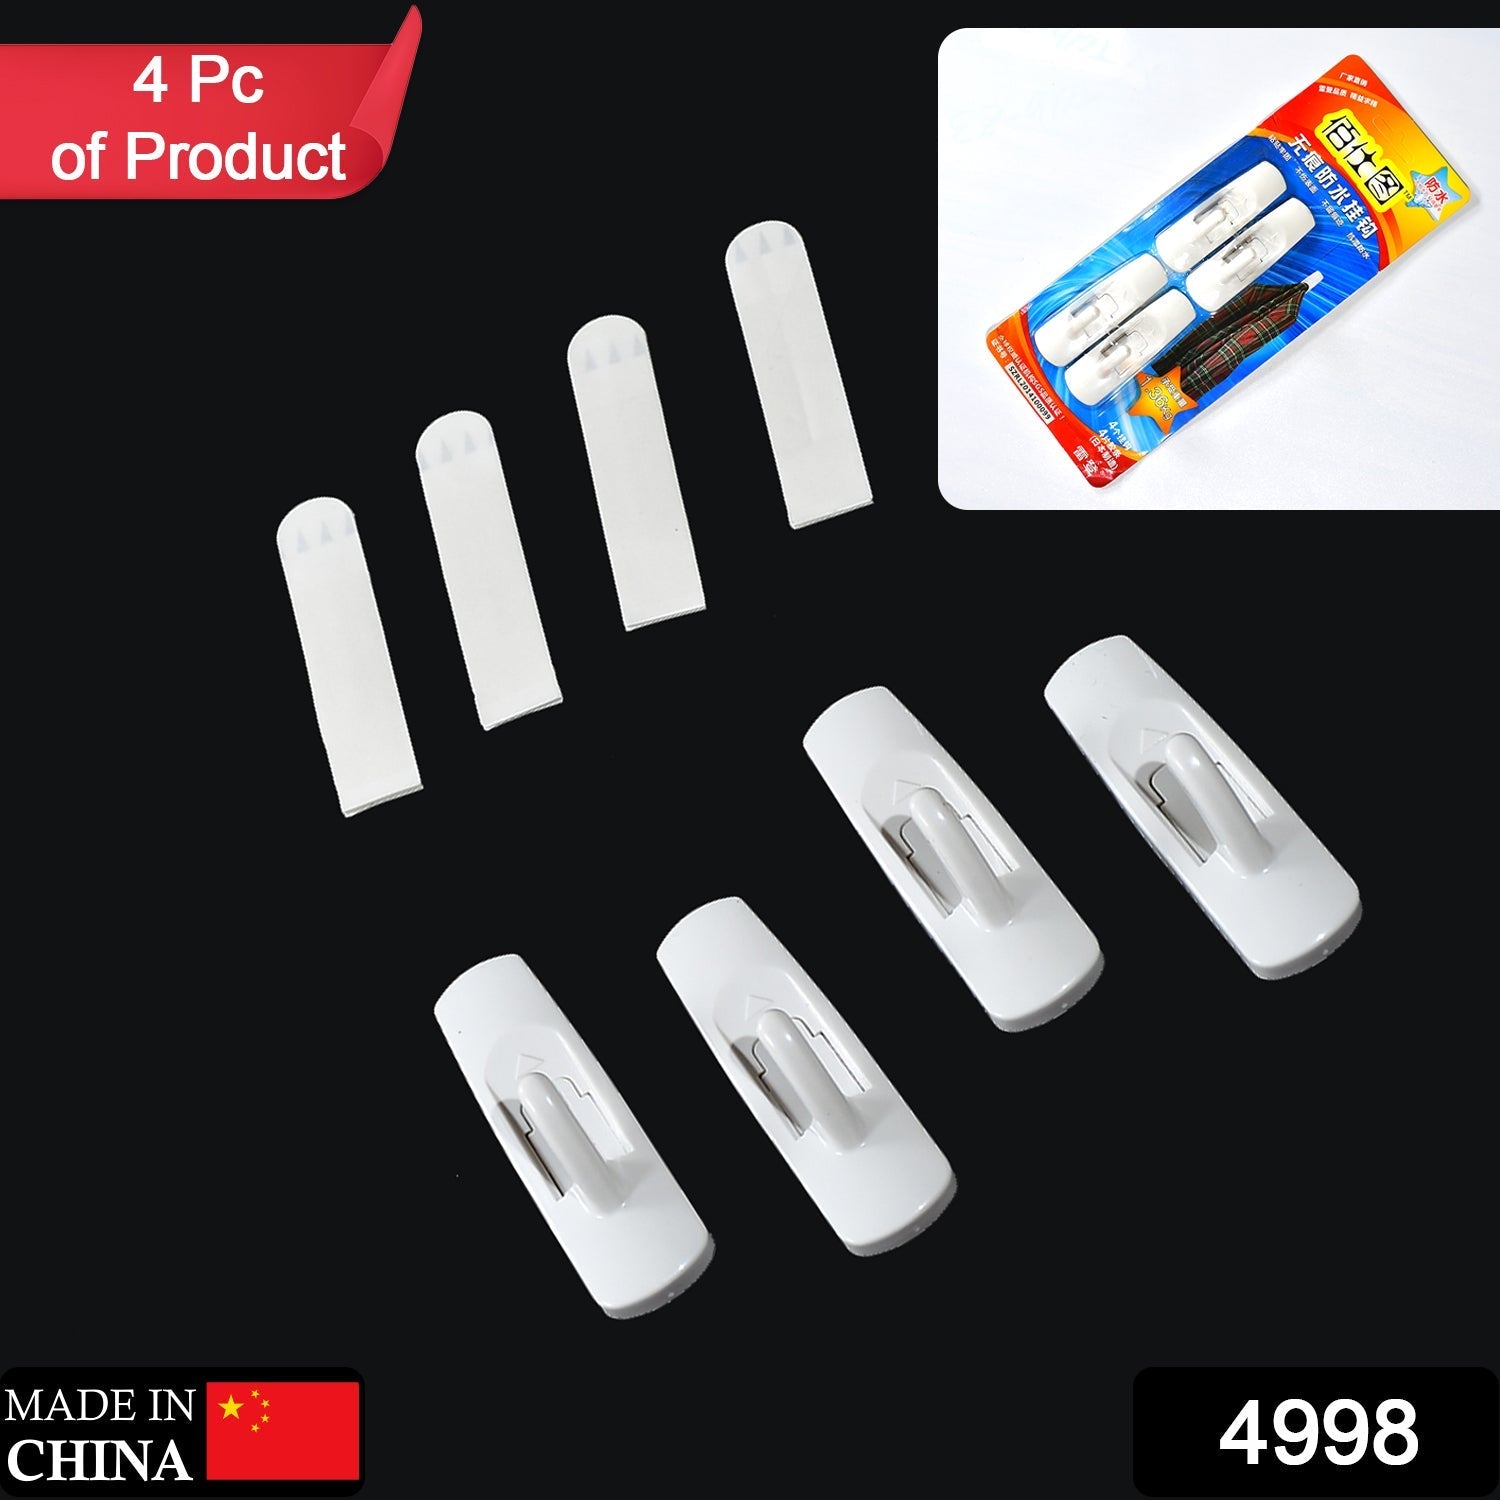 4998 Adhesive Sticker Plastic Hook 4 Hooks and  4 Sticker strips, Damage-Free Hanging, Holds Strong Plastic Hook DeoDap